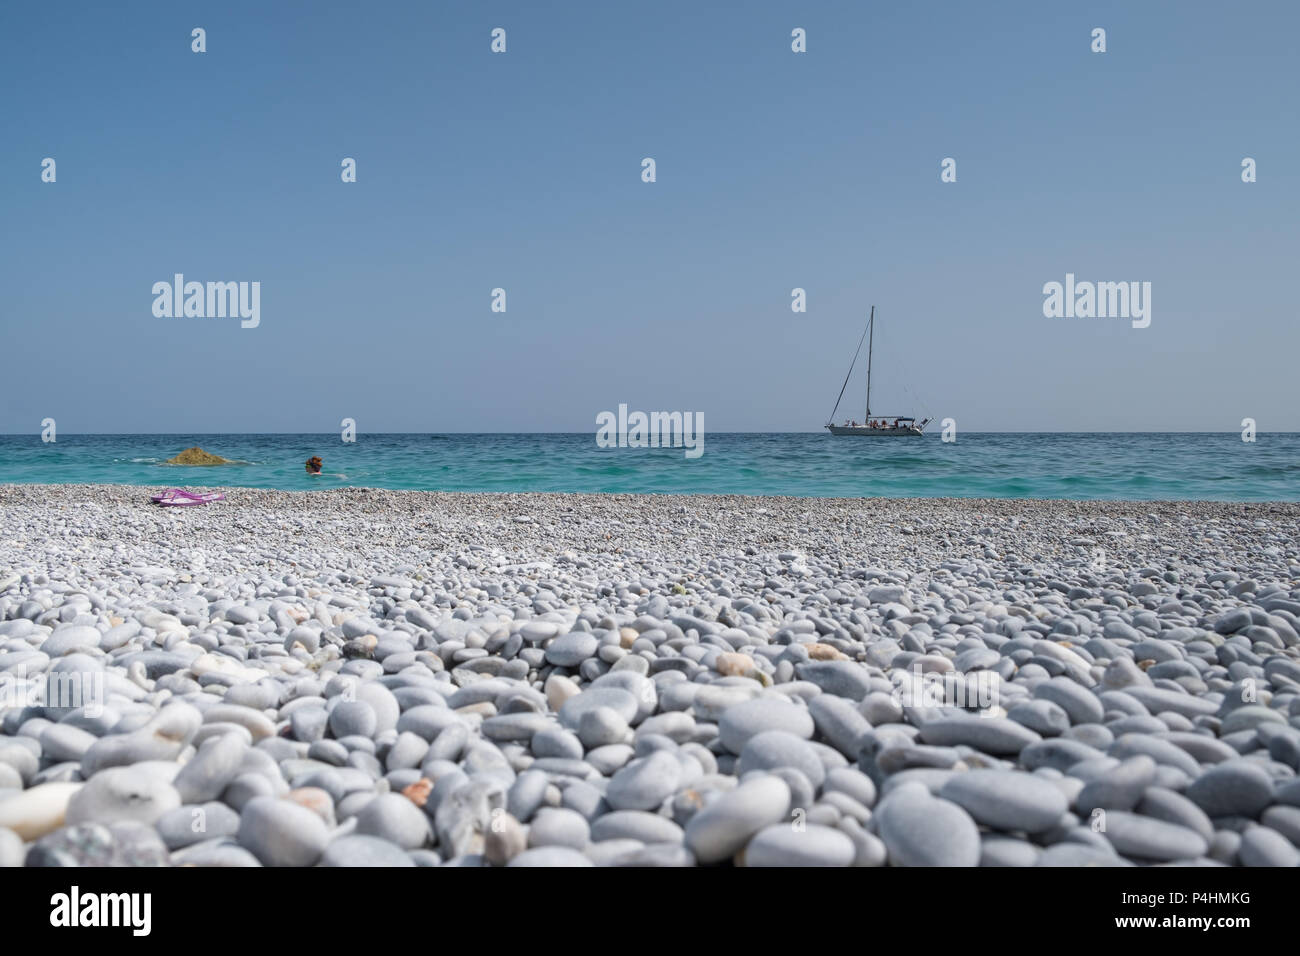 Beautiful pebble beach with a sailing boat and swimmer in the bacground. Stock Photo